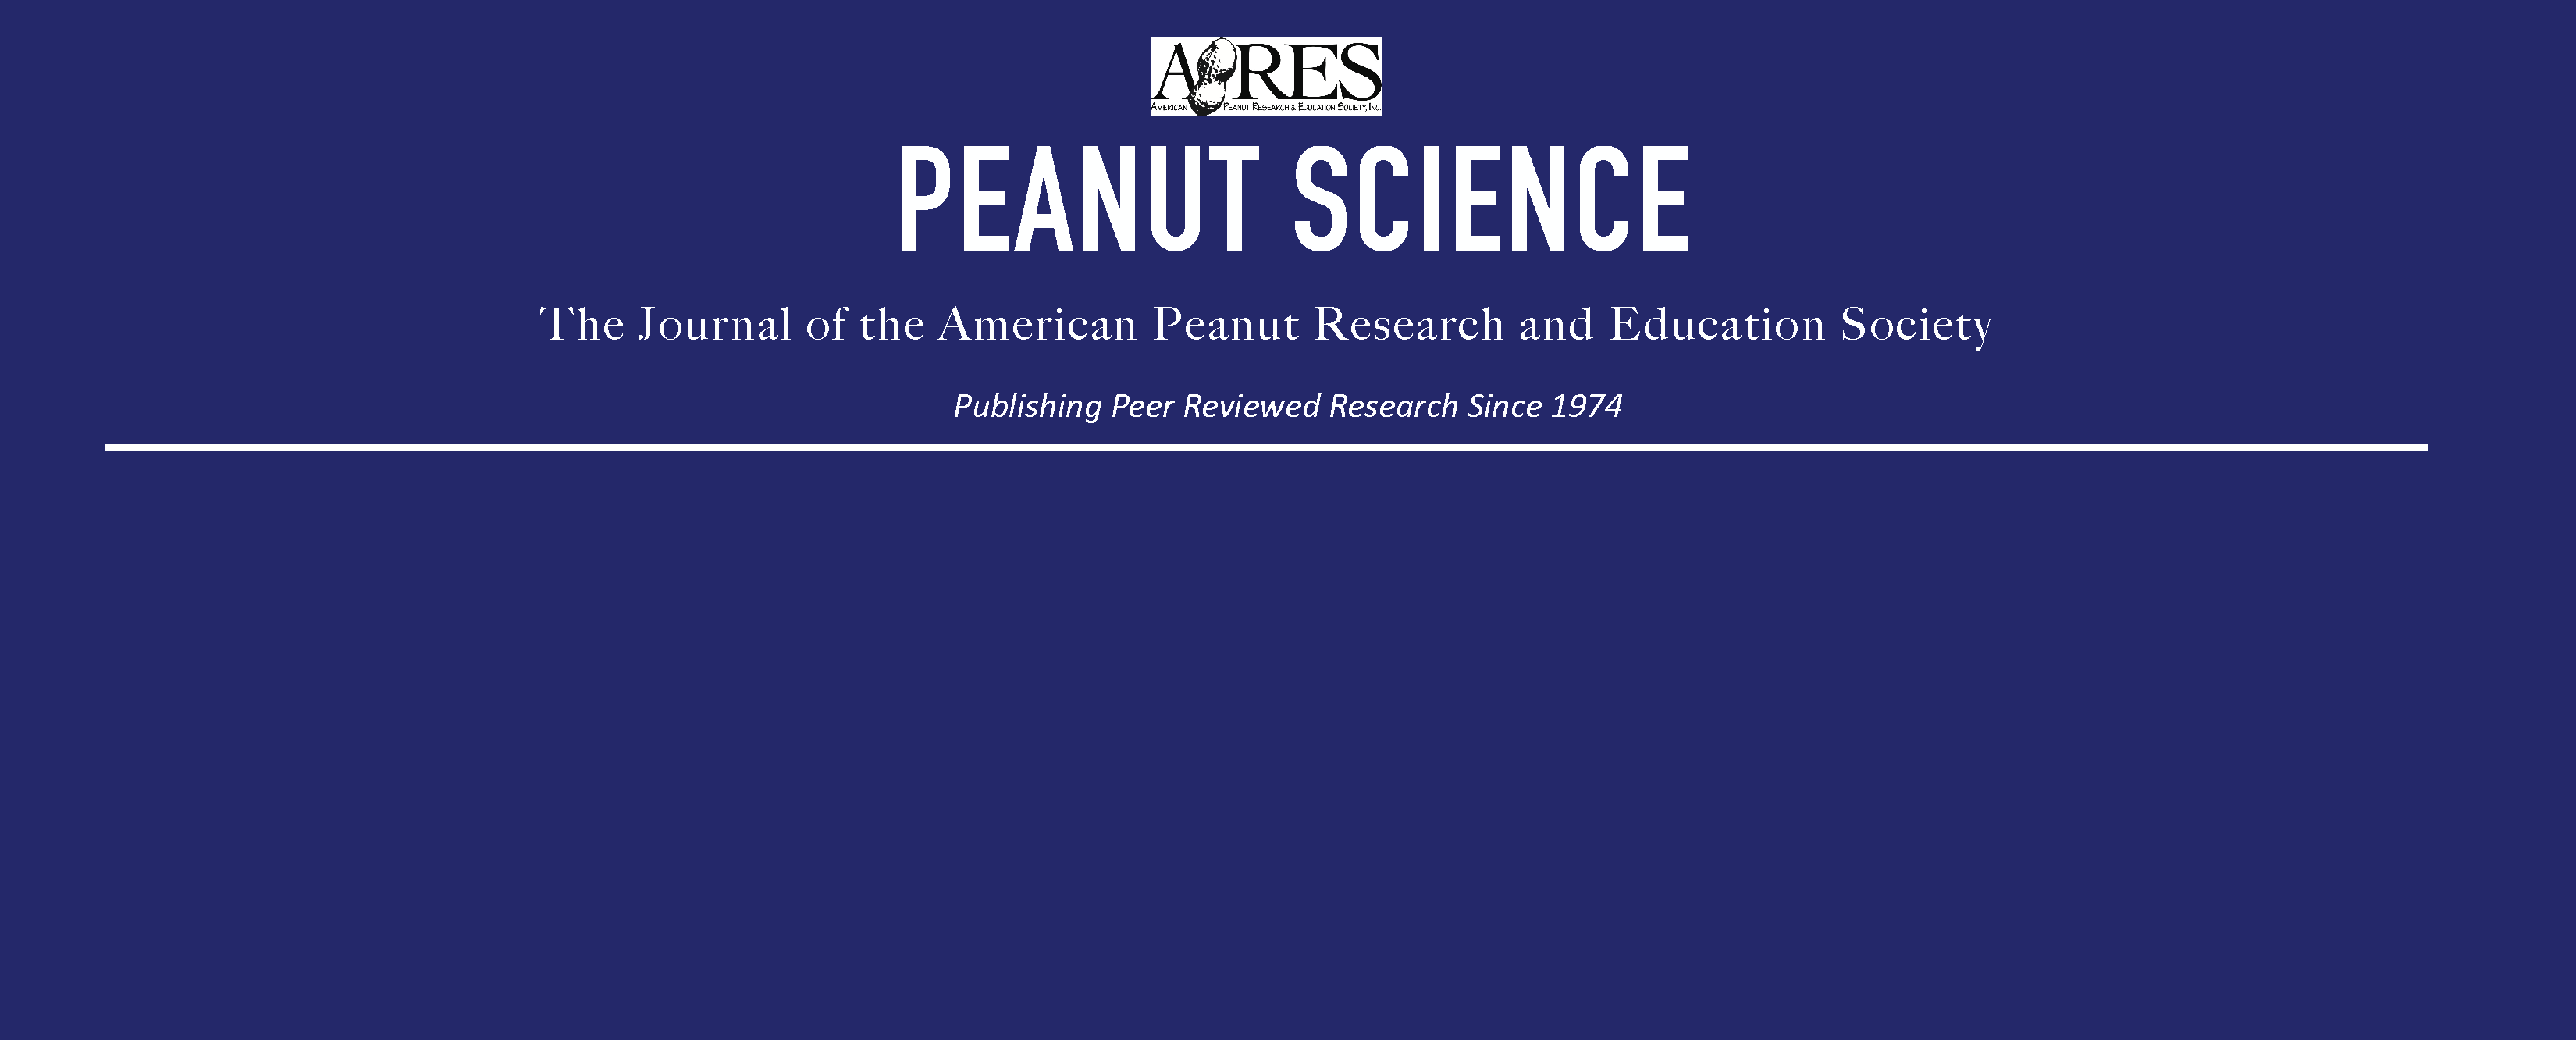 A Detached Shoot Technique To Evaluate the Reaction of Peanut Genotypes to Sclerotinia Minor¹